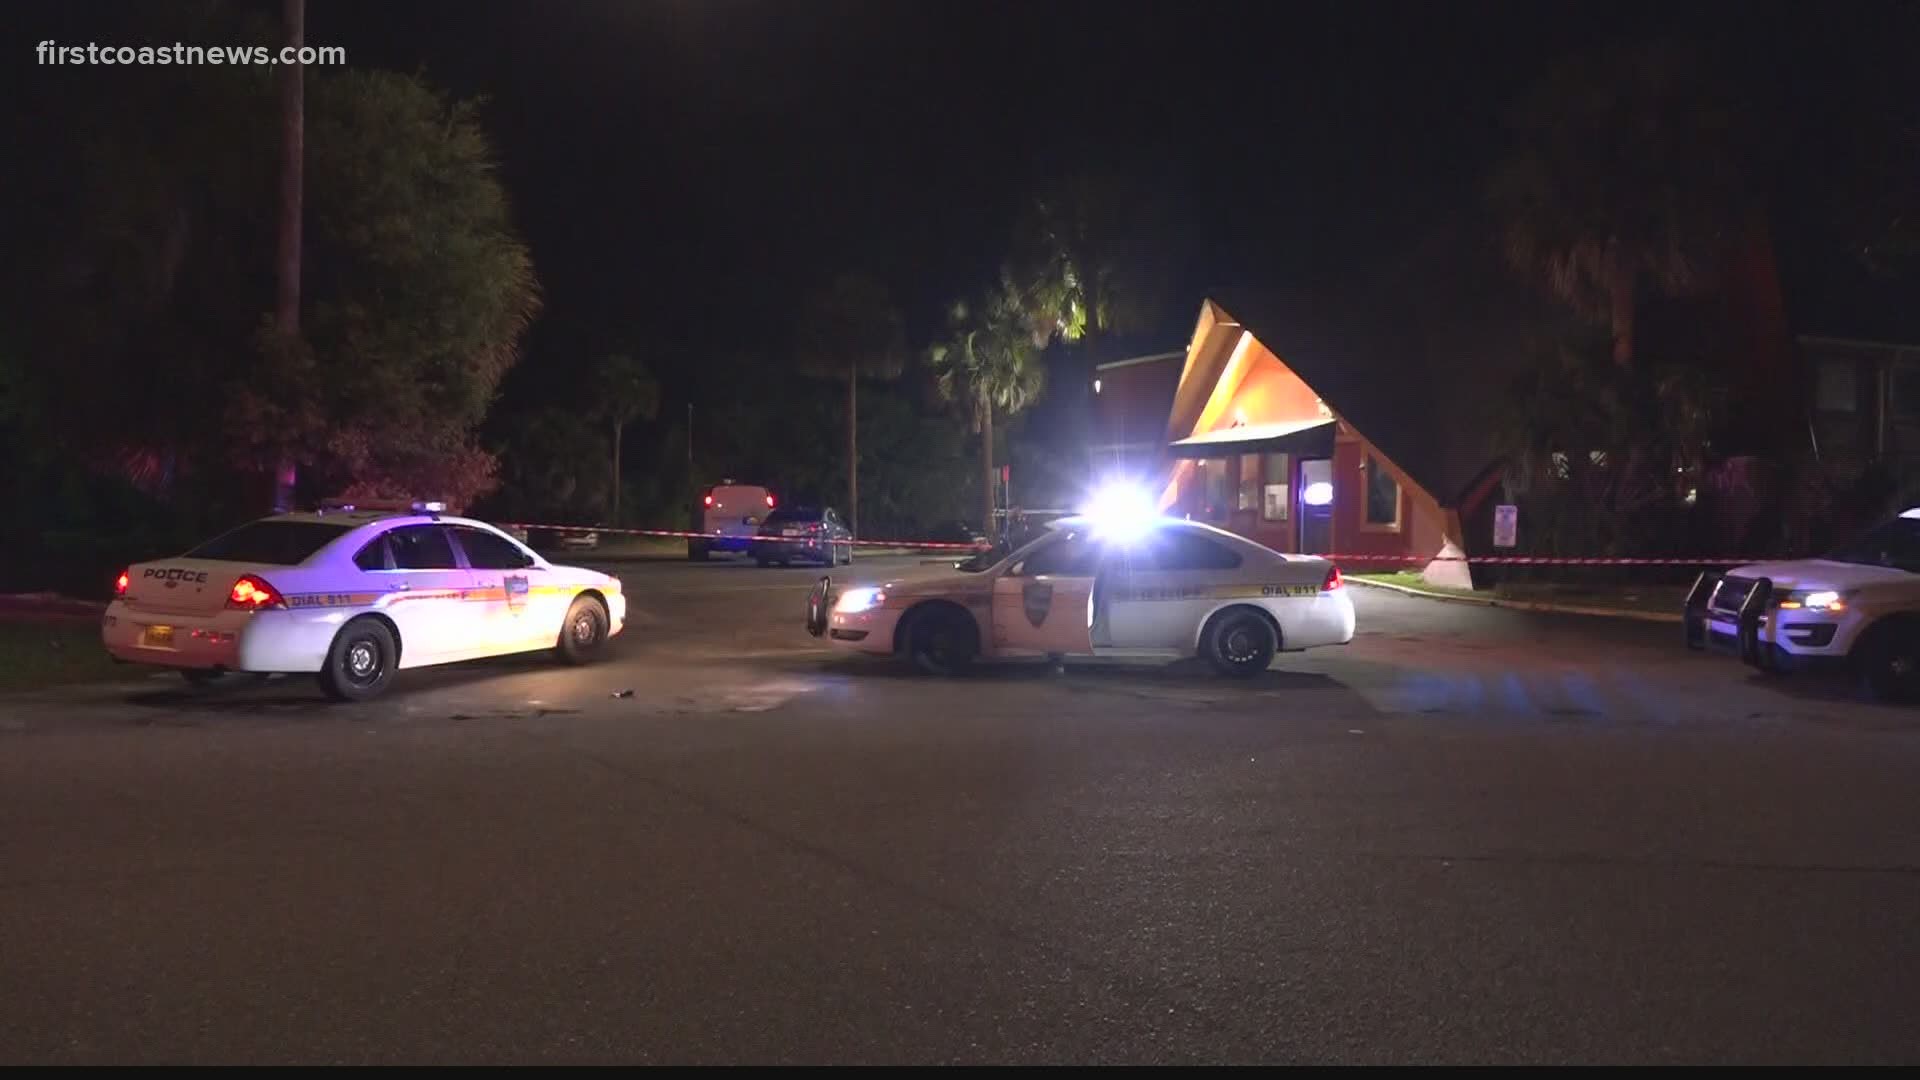 Around 11:15, the Jacksonville Sheriff's Office says officers were dispatched to 1000 Golfair Boulevard in reference to a person with a gunshot wound.